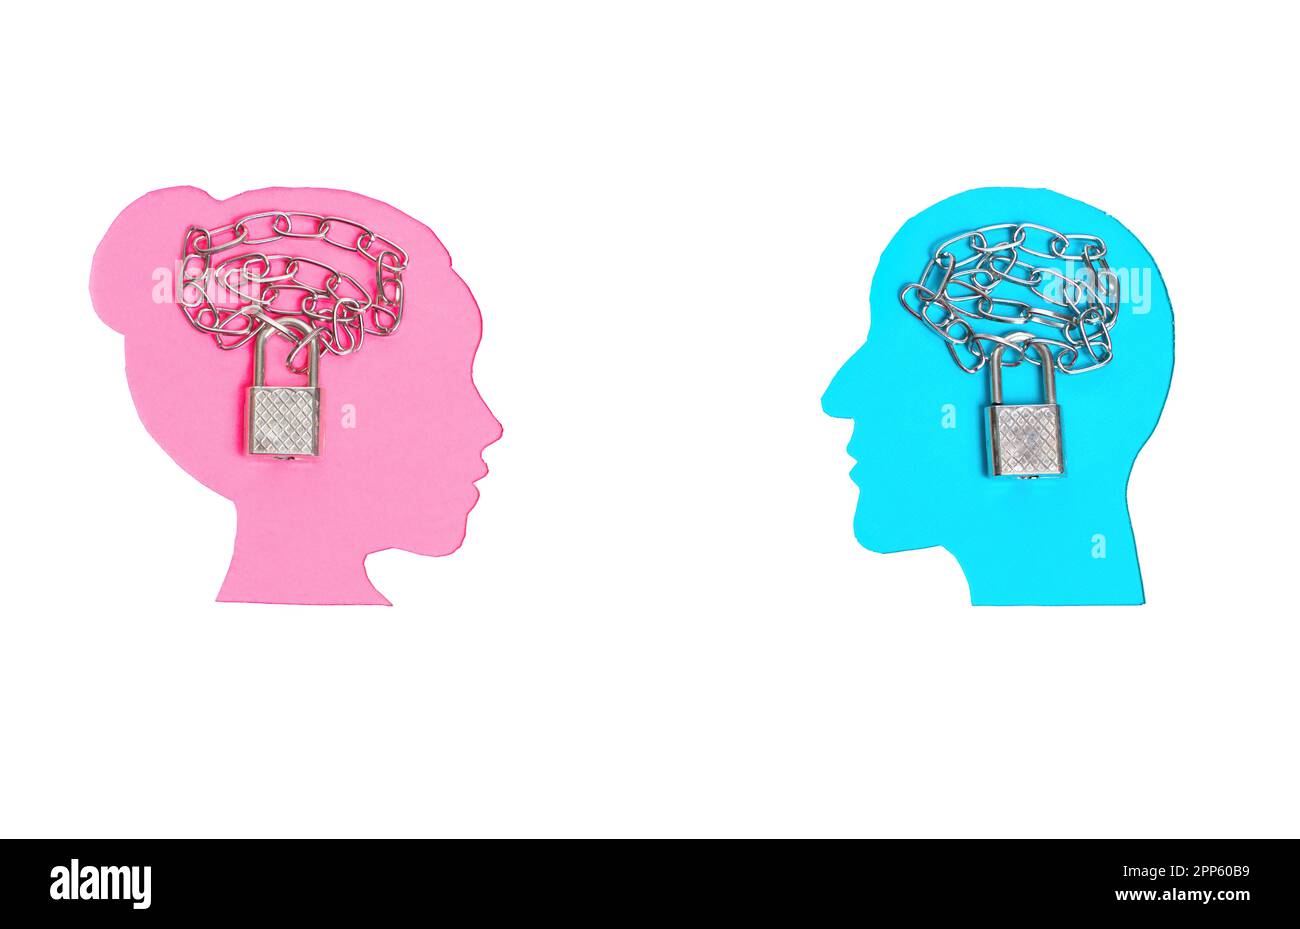 Pink and blue female and male head profile paper cutouts on white with chained padlocks symbolically placed inside the brain area of each face. Stock Photo